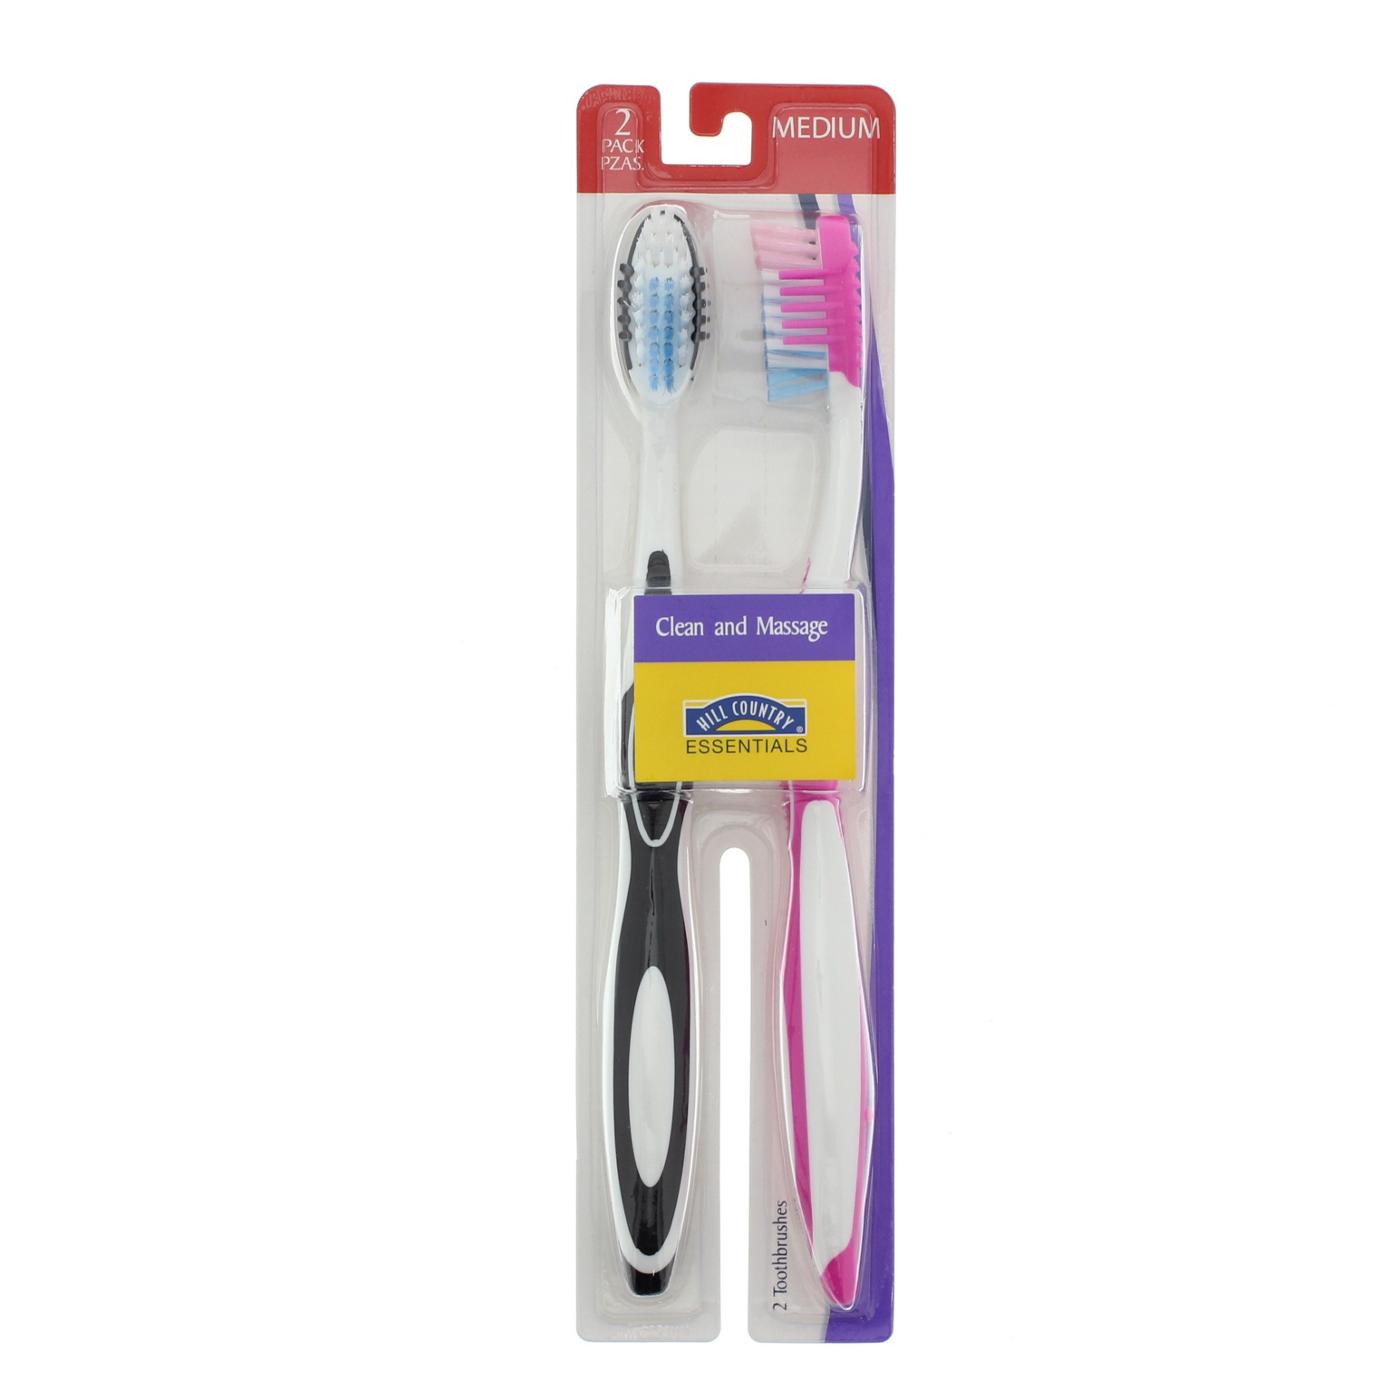 Hill Country Essentials Clean and Massage Medium Toothbrushes - Colors May Vary; image 2 of 2